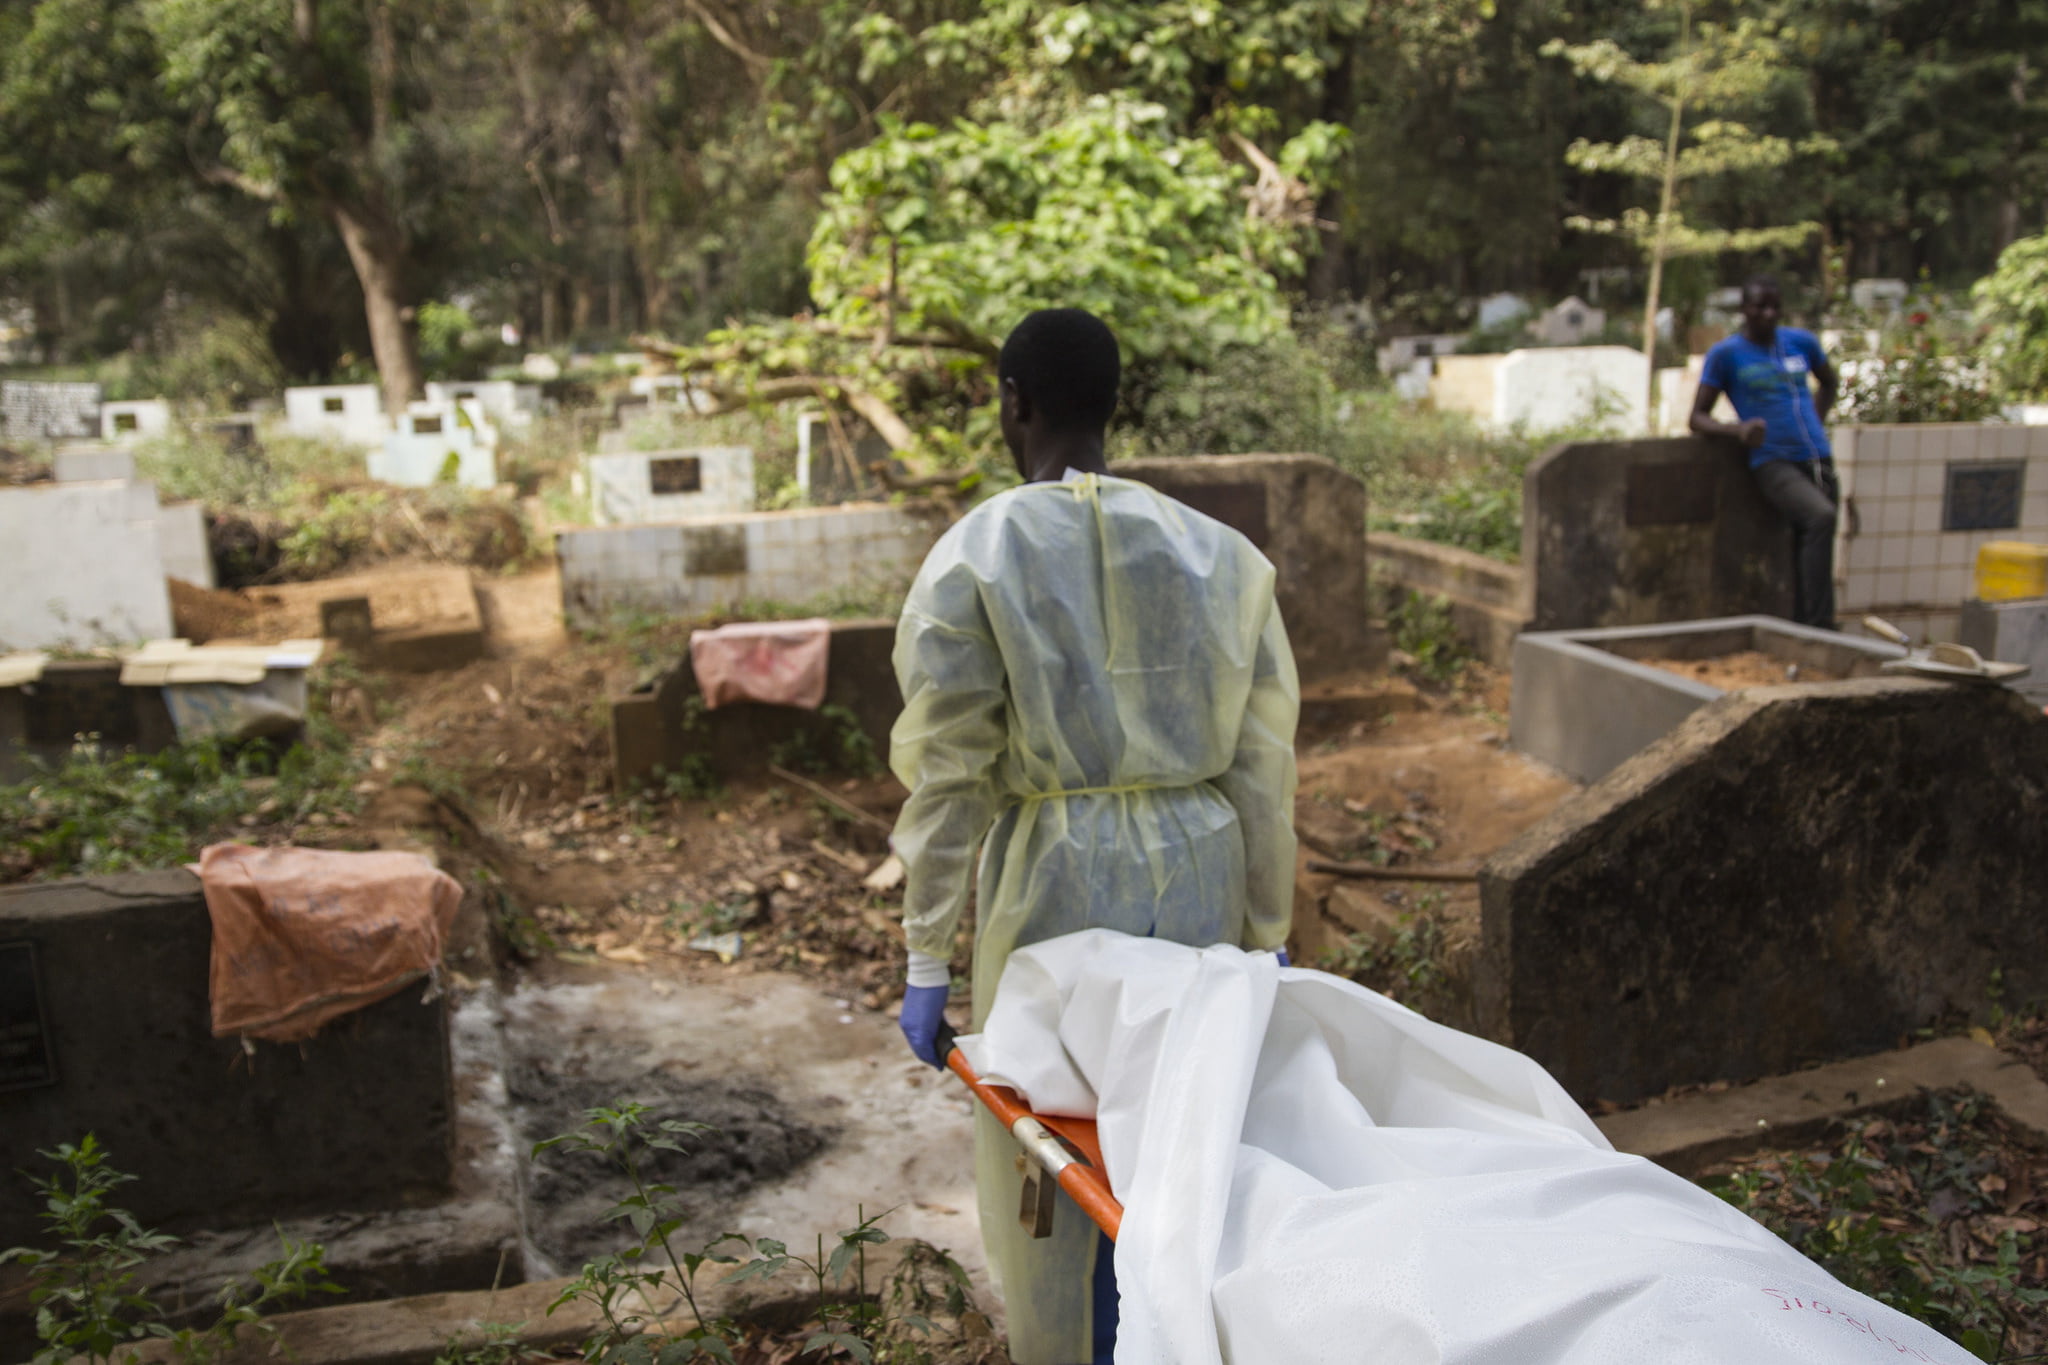 Burial teams of volunteers in Guinea, wearing full personal protective equipment and working in teams of seven, carry the body of a 40 year-old woman who died from Ebola virus from the MSF Treatment Center at Donka Hospital to the Conakry Cemetary for a safe burial.